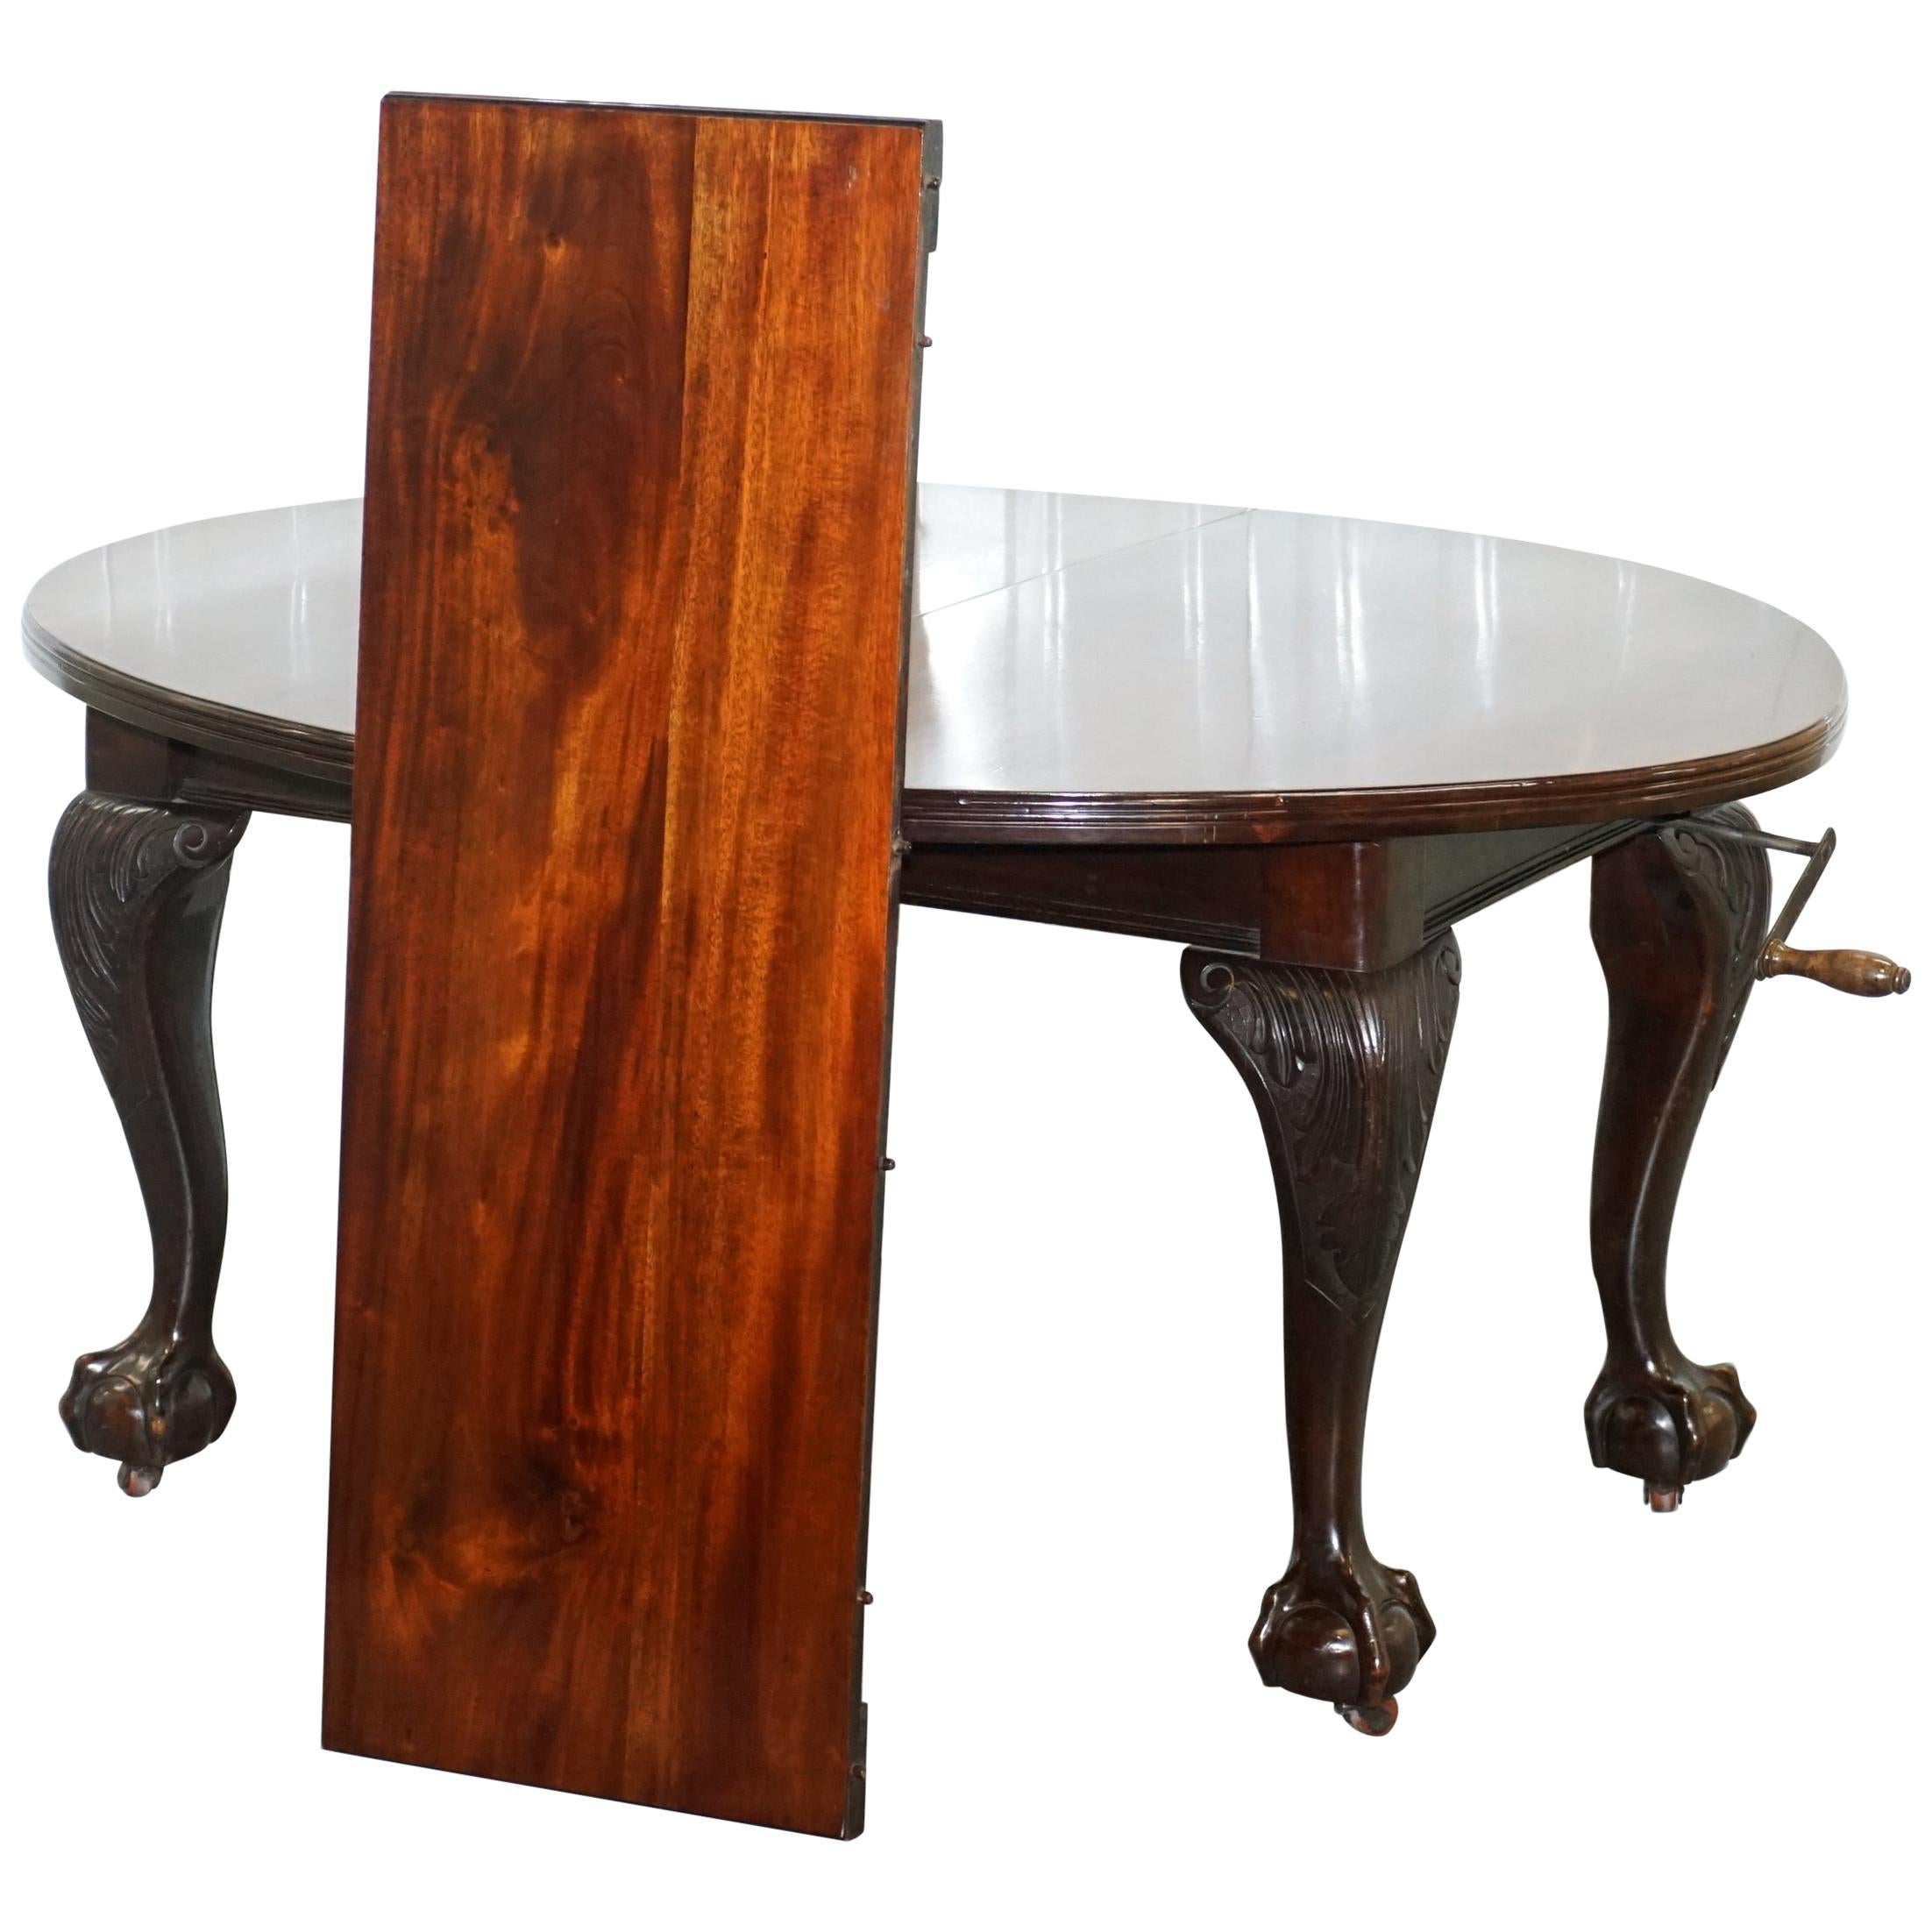 Stunning Victorian James Phillips & Son's Solid Hardwood Extending Dining Table For Sale